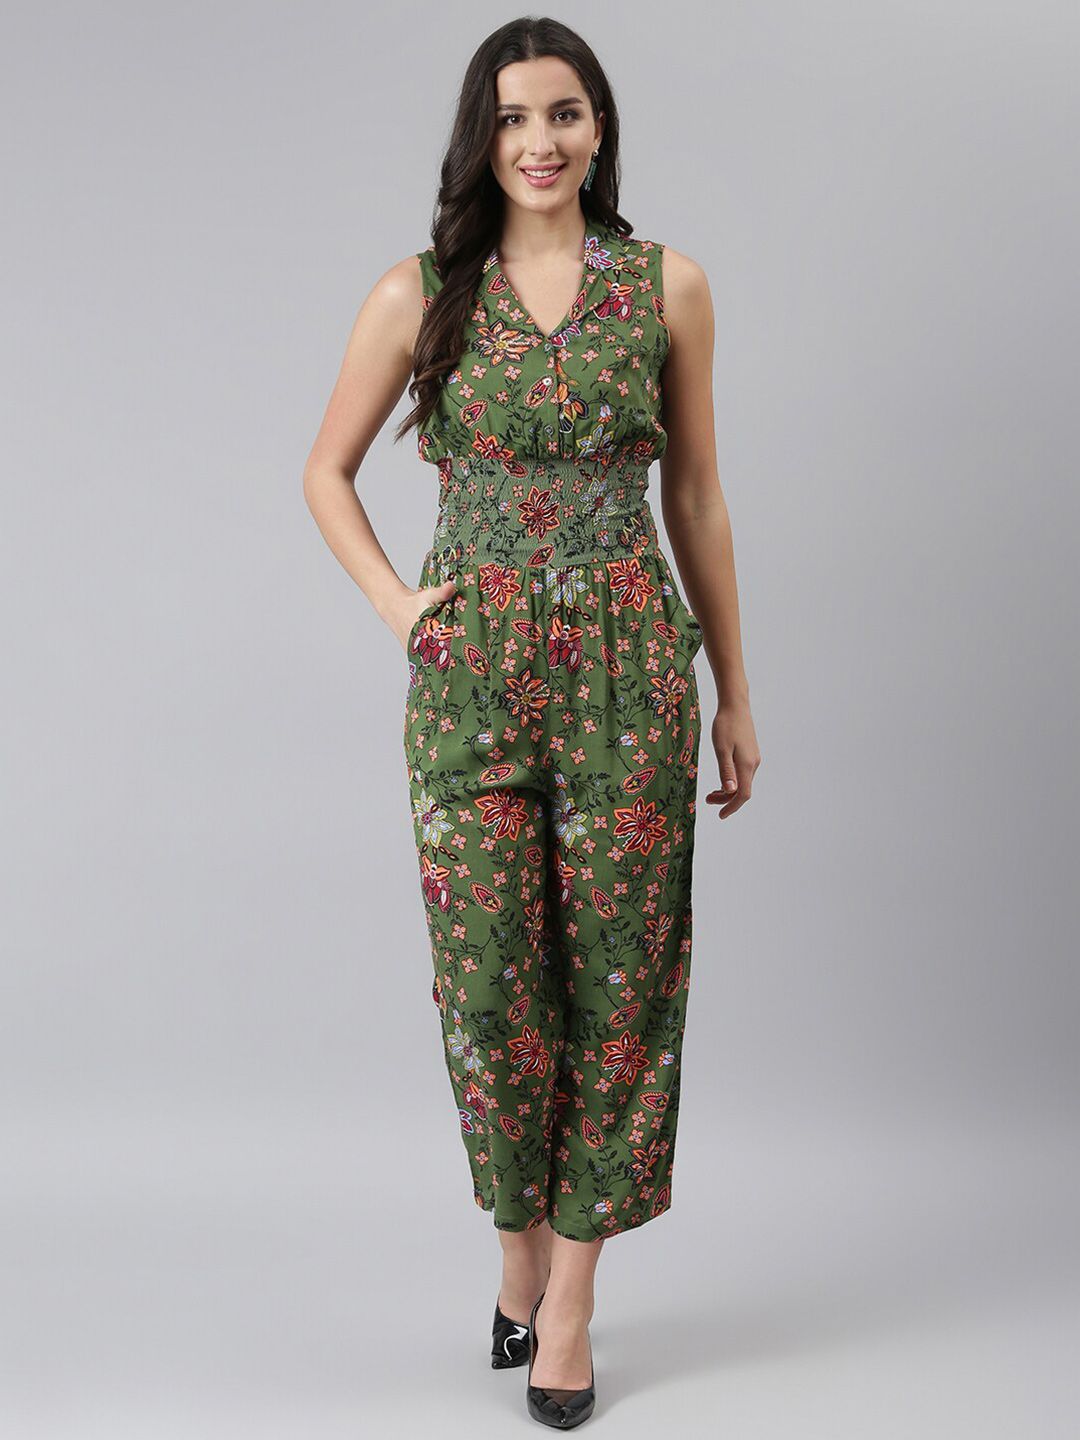 DEEBACO Olive Green & Red Printed Culotte Jumpsuit Price in India